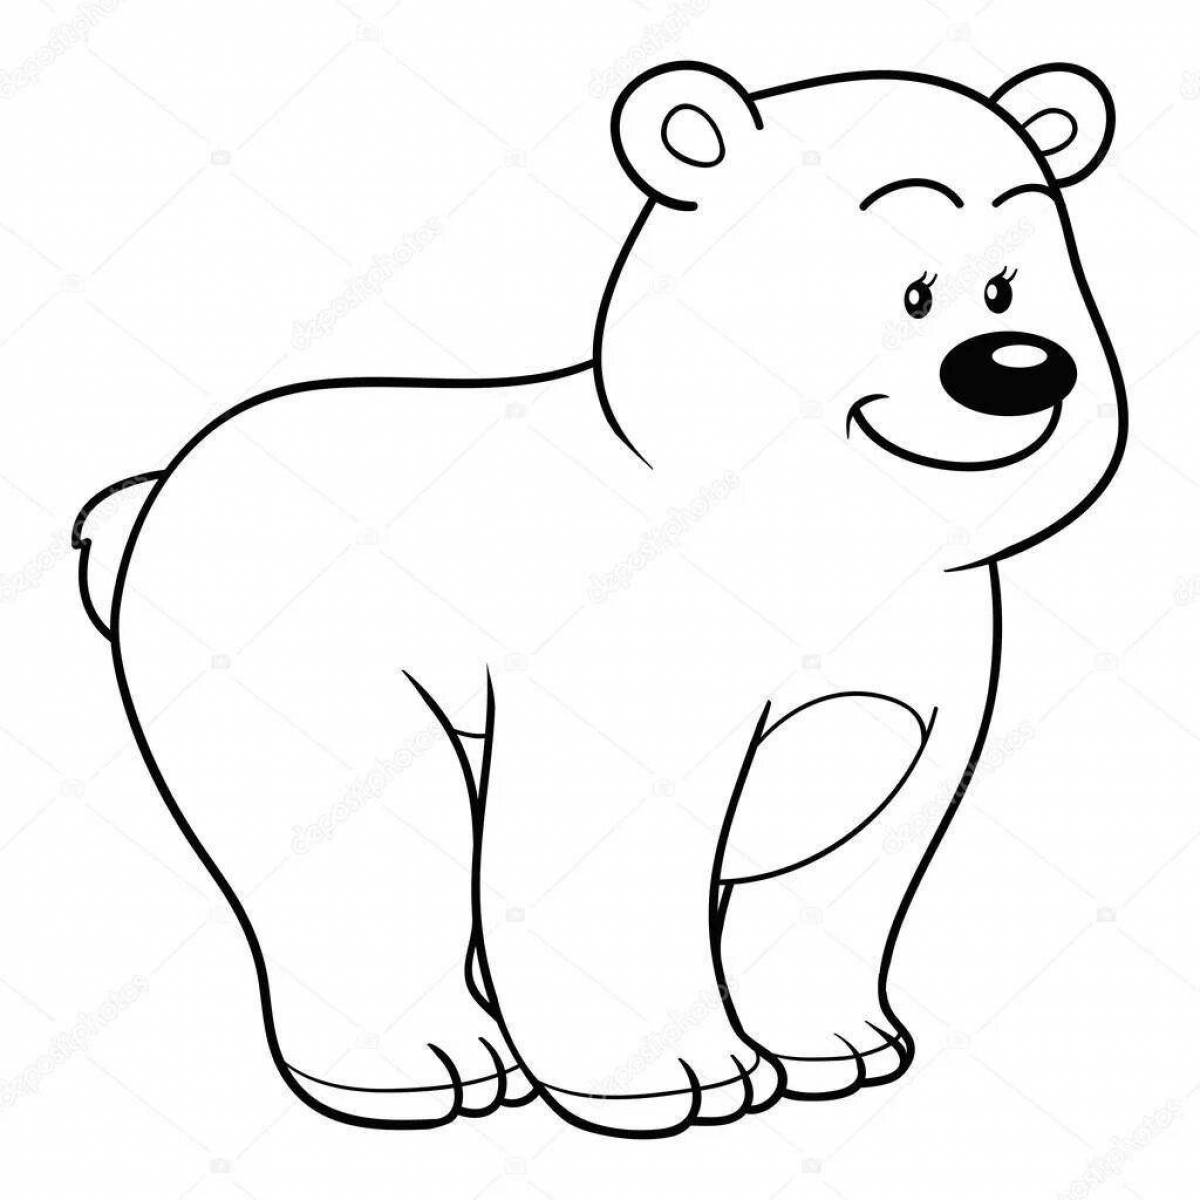 Coloring book fluffy white and brown bear